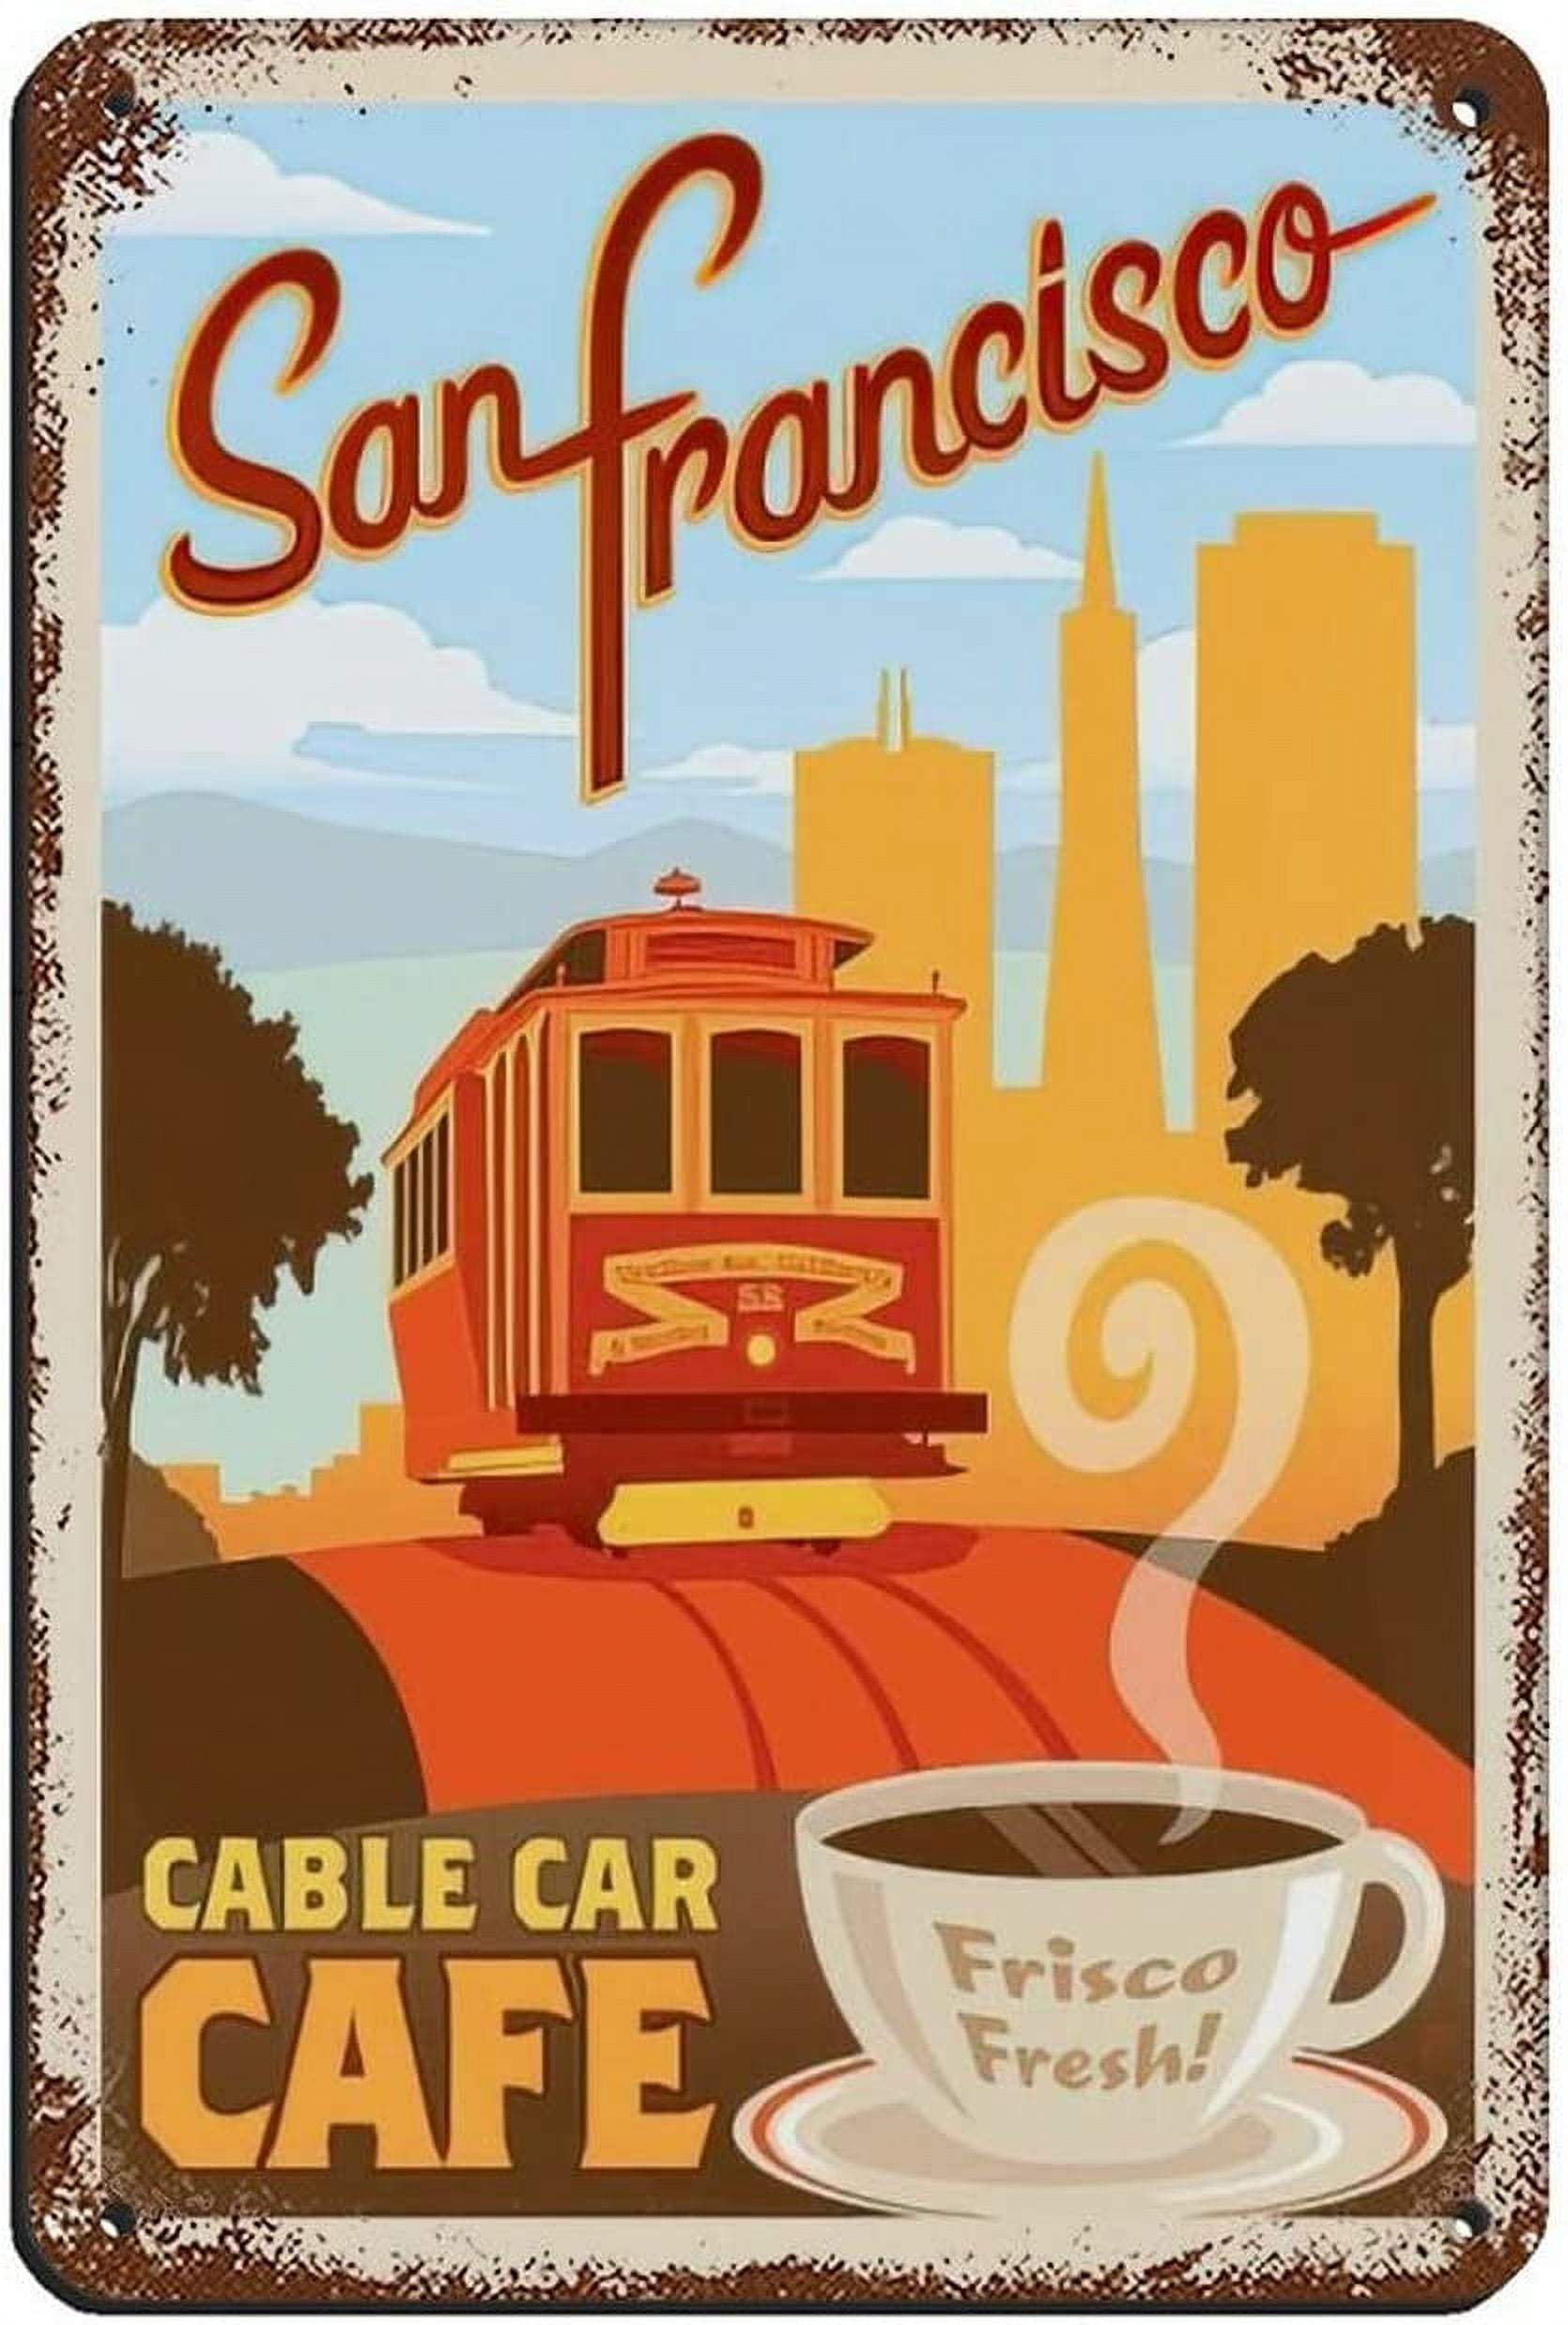 Vintage Retro Coffee Art San Francisco Cable Car Cafe Retro Poster Metal  Tin Sign Chic Art Retro Iron Painting Bar People Cave Cafe Family Garage